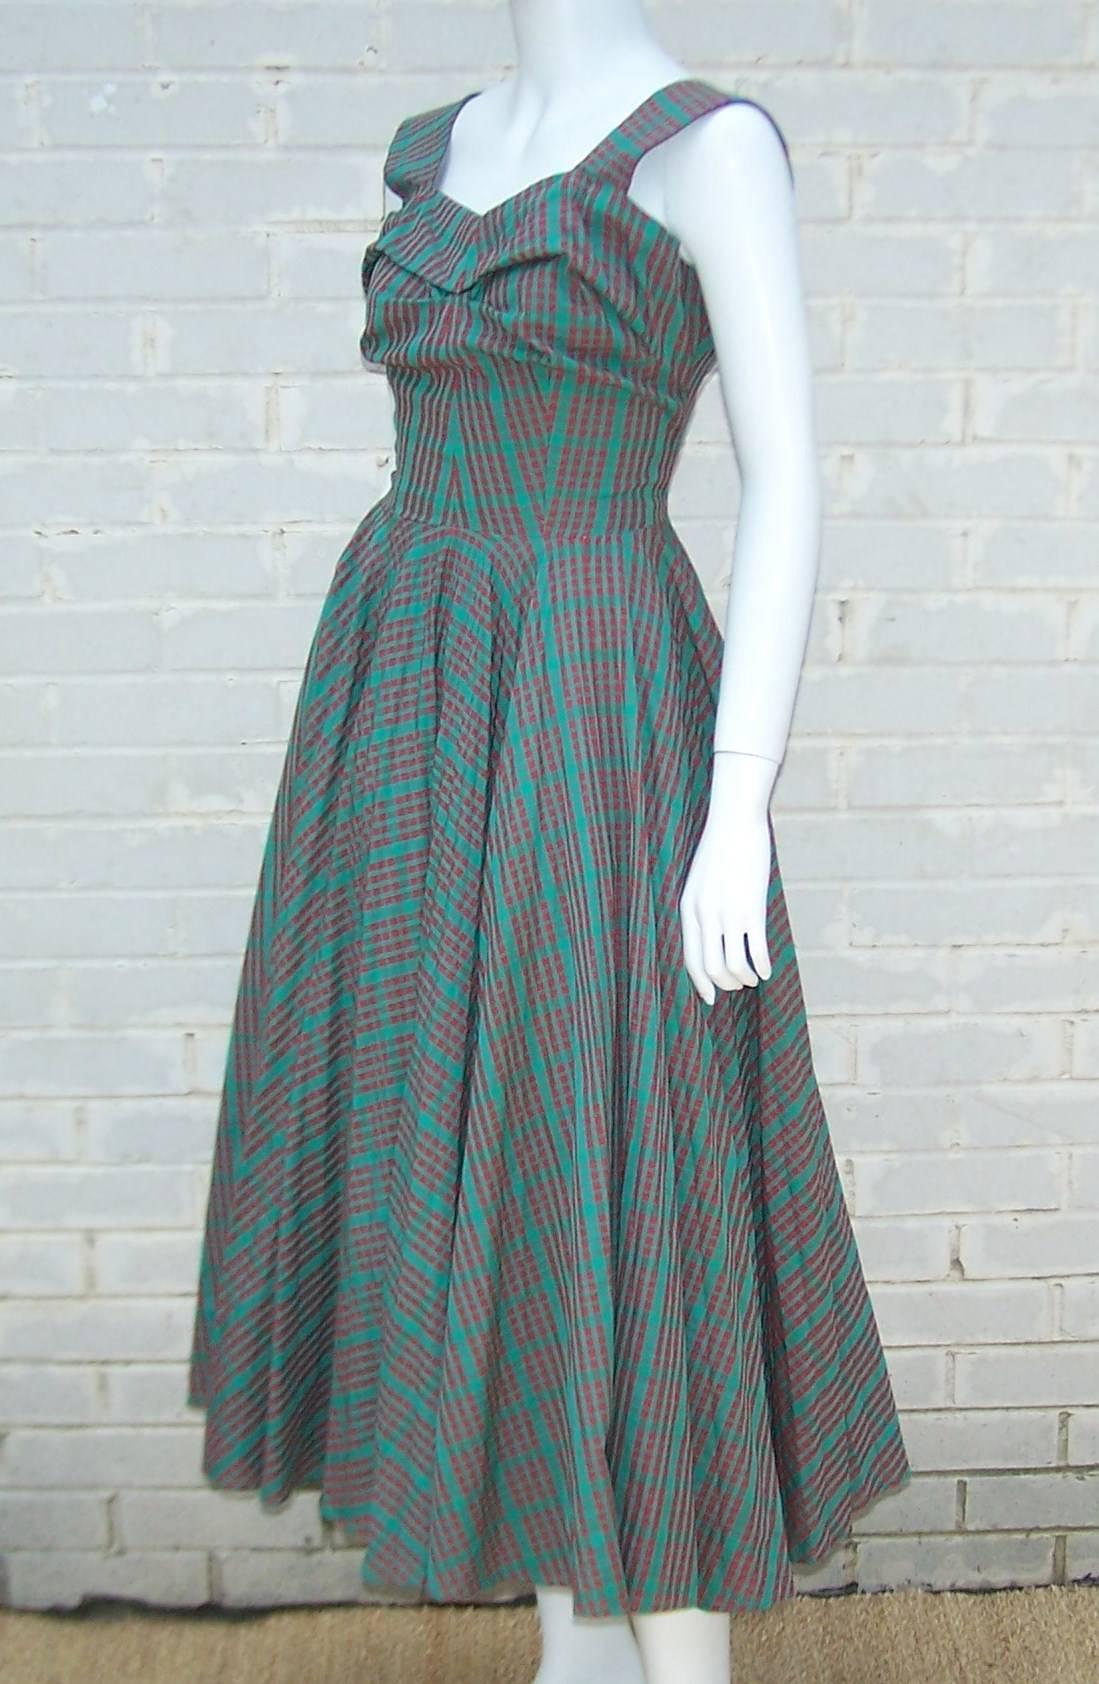 Starting with the red and green plaid fabric and ending with a classic early 1950s silhouette ... this dress is sure to please.  The dress appears to be custom made with hand finishing and an eye for detail.  The bodice is slightly ruched at the